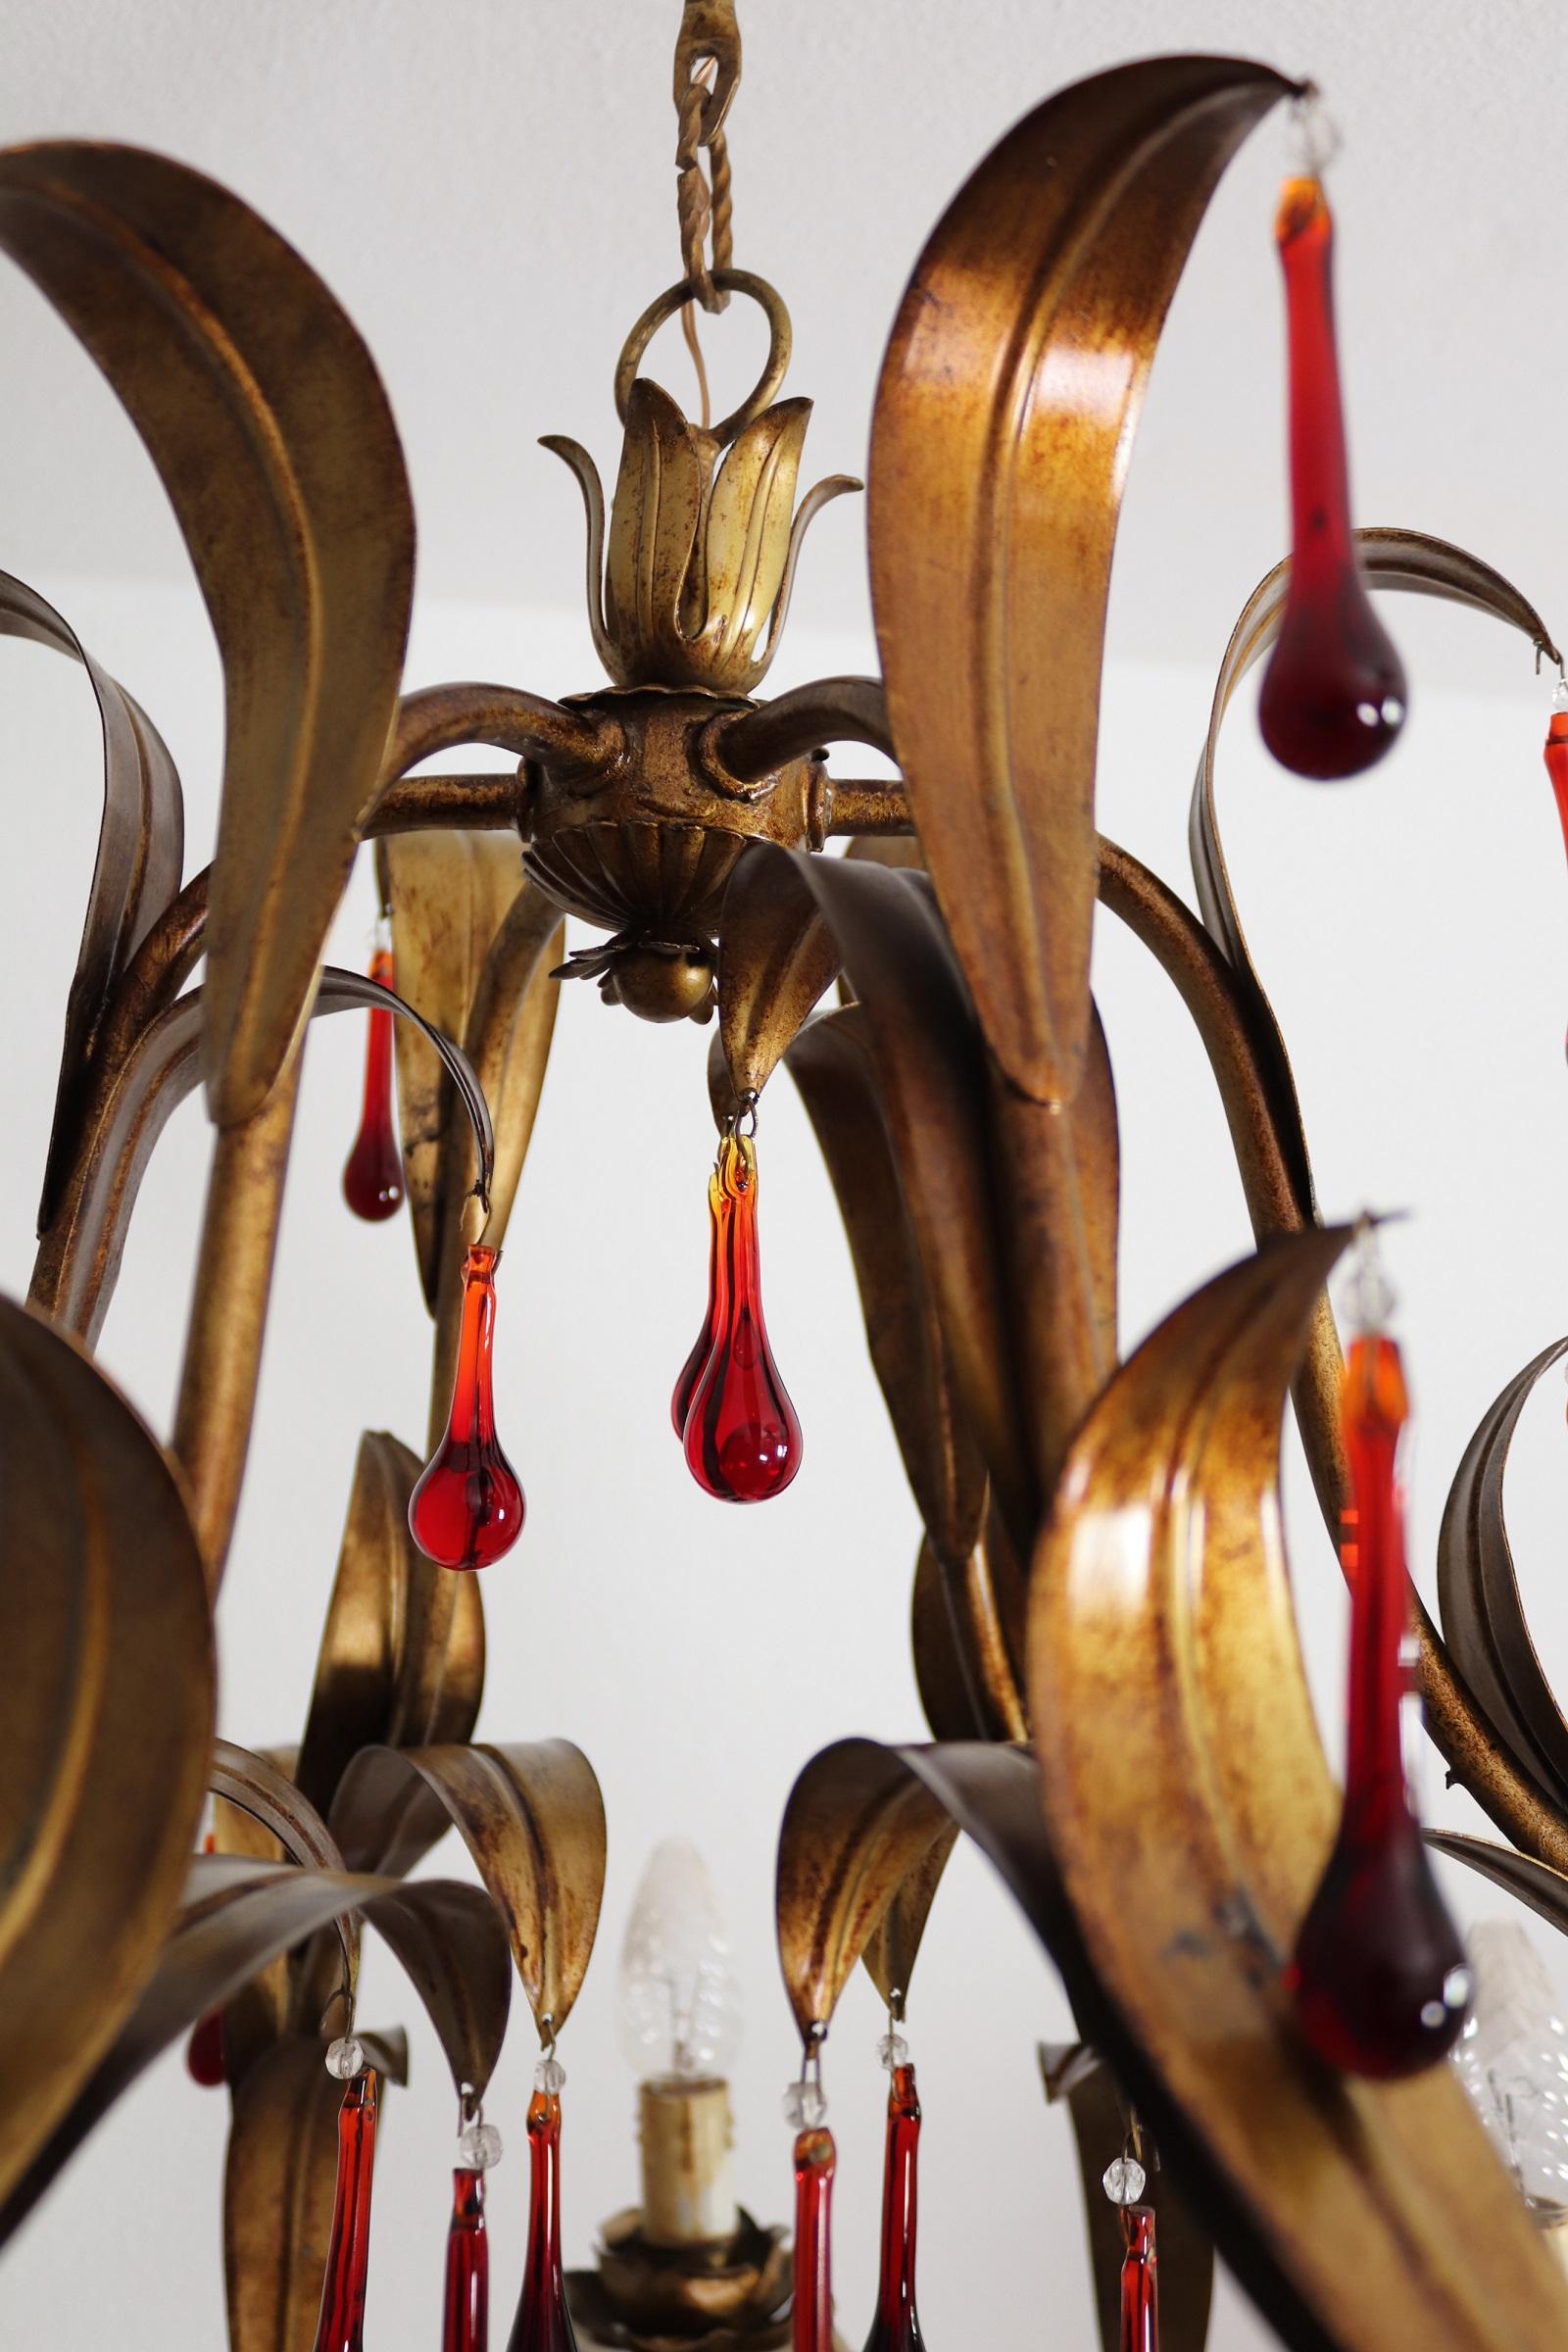 Italian Midcentury Gilt Florentine Chandelier with Red Murano Glass Drops, 1970s For Sale 5